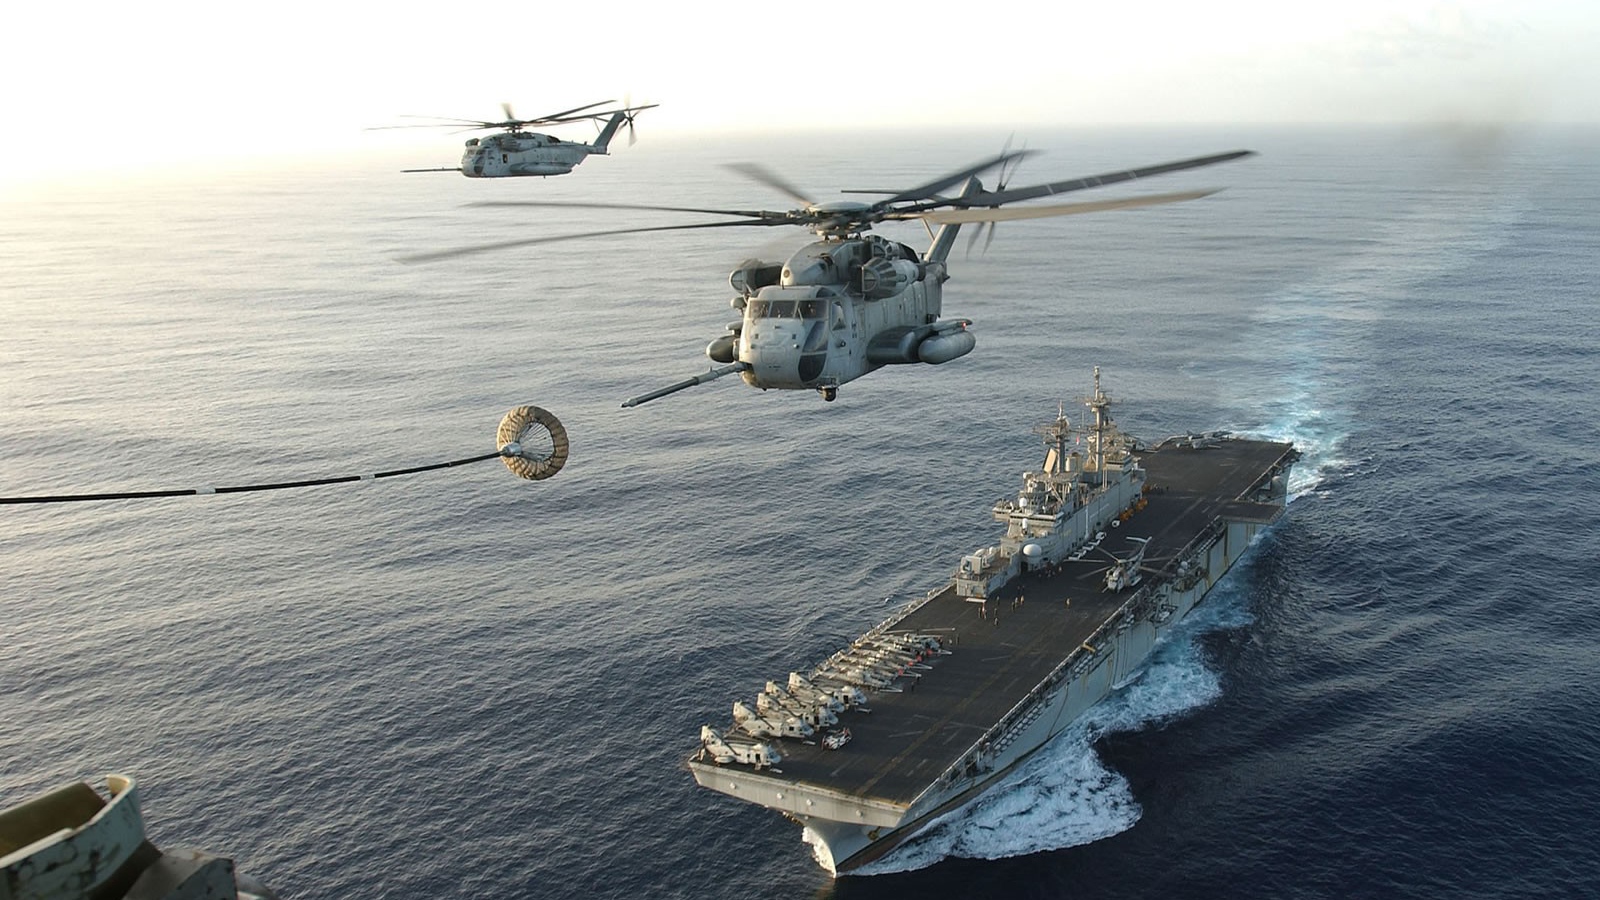 Refueling helicopters